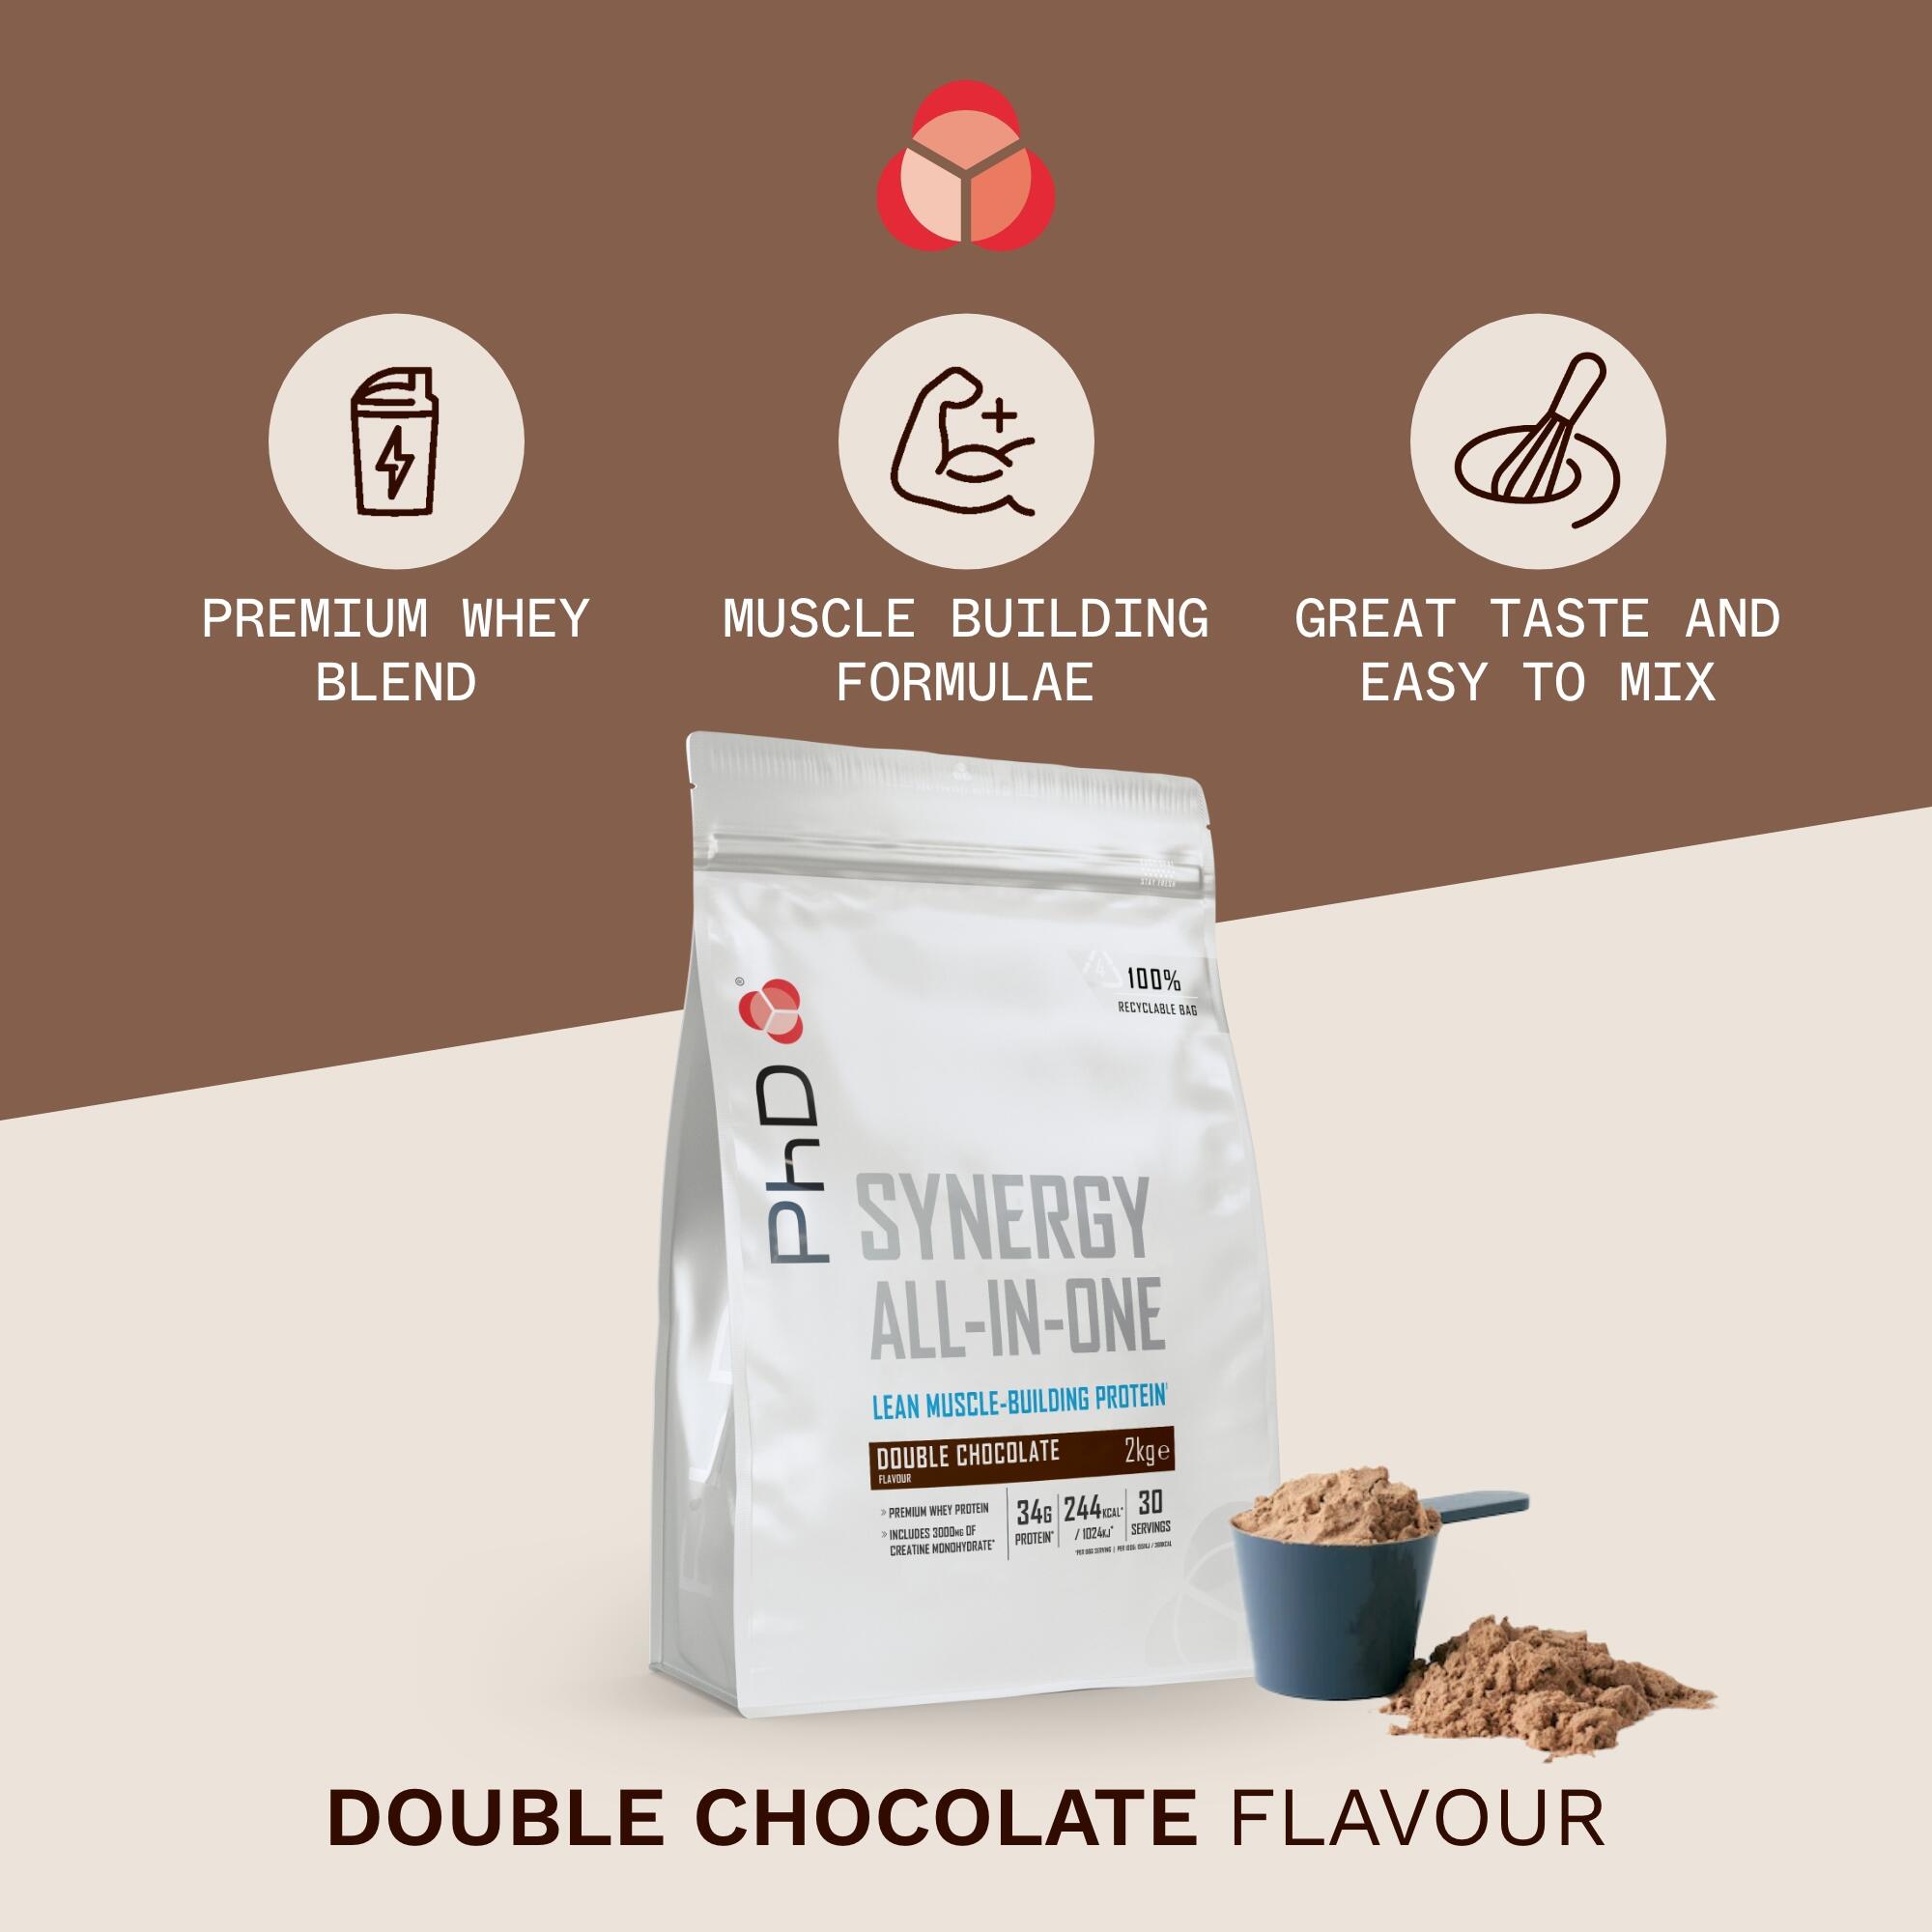 PhD Nutrition | Synergy Powder | Double Chocolate Flavour | 2kg 4/5